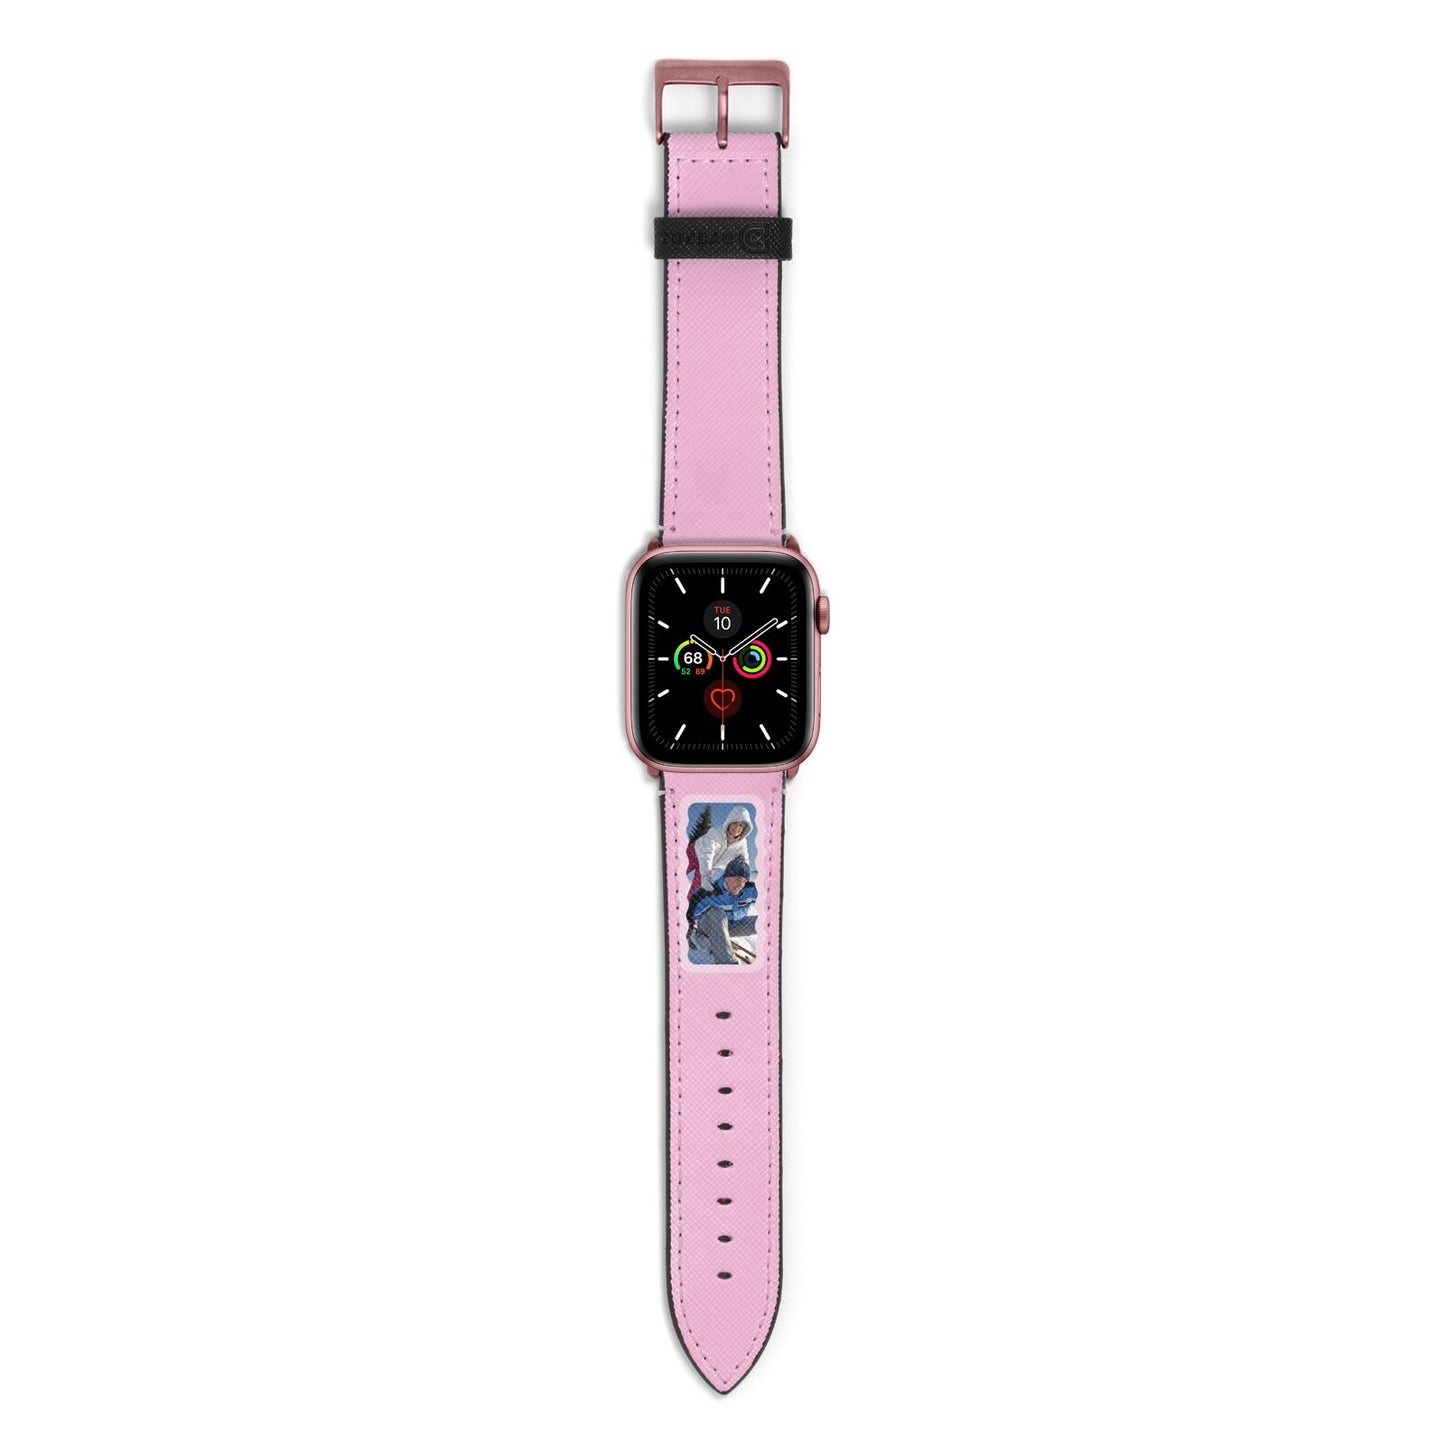 Wavy Photo Border Apple Watch Strap with Rose Gold Hardware